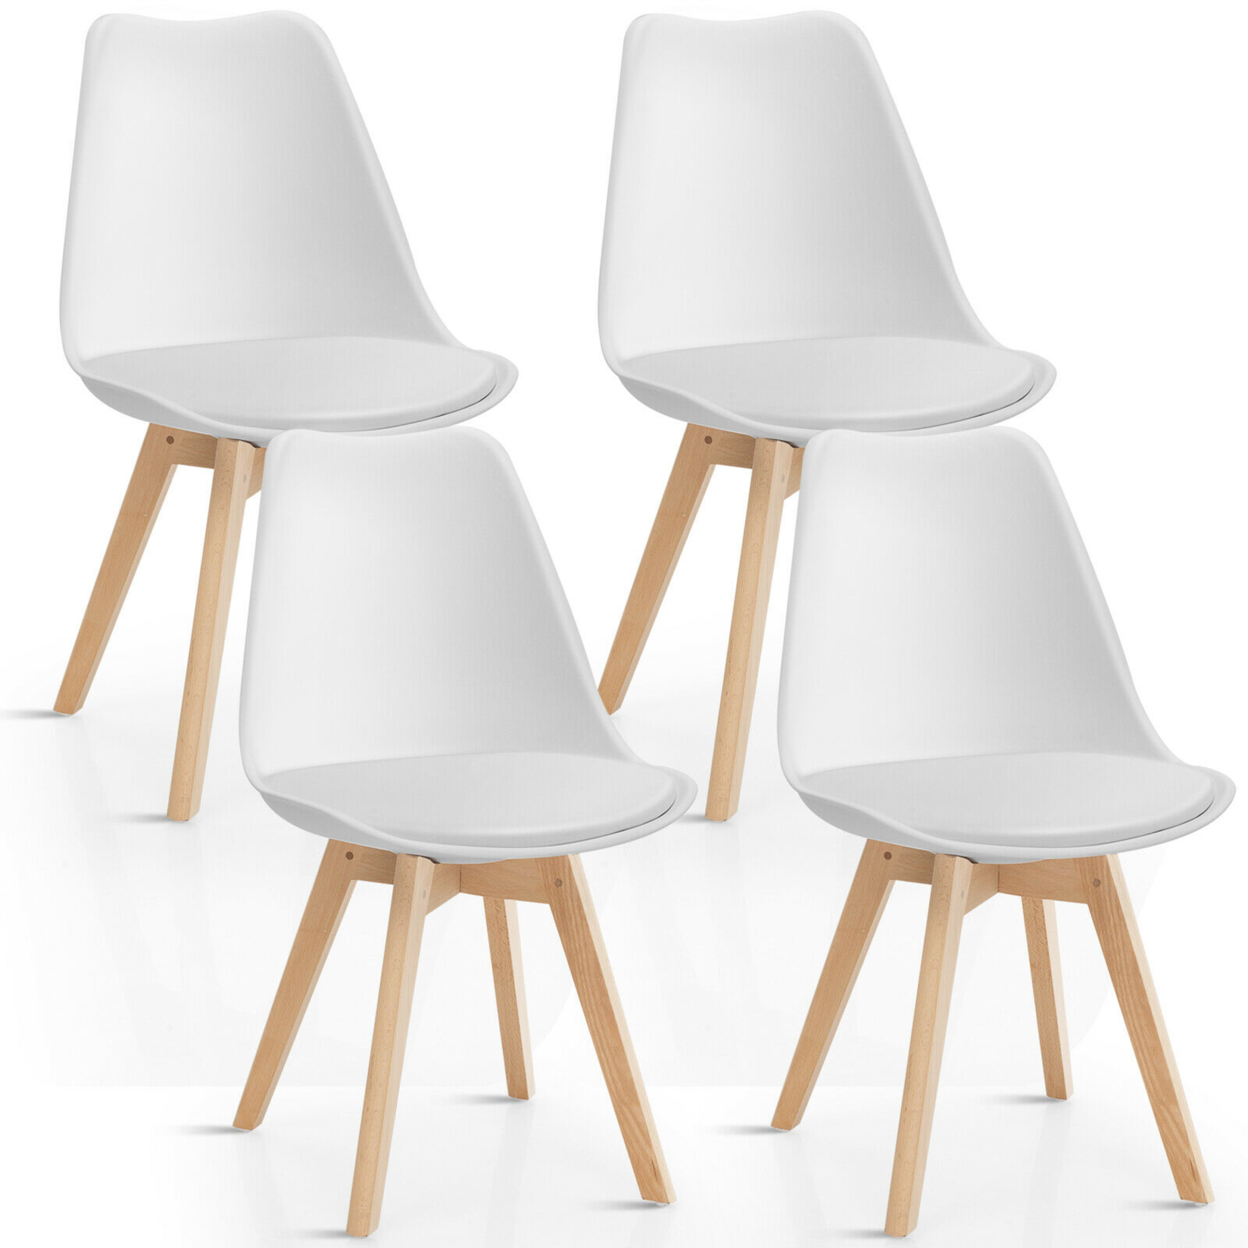 Set Of 4 Mid Century Dining Chairs Modern DSW Armless Side Chair Wood Legs White